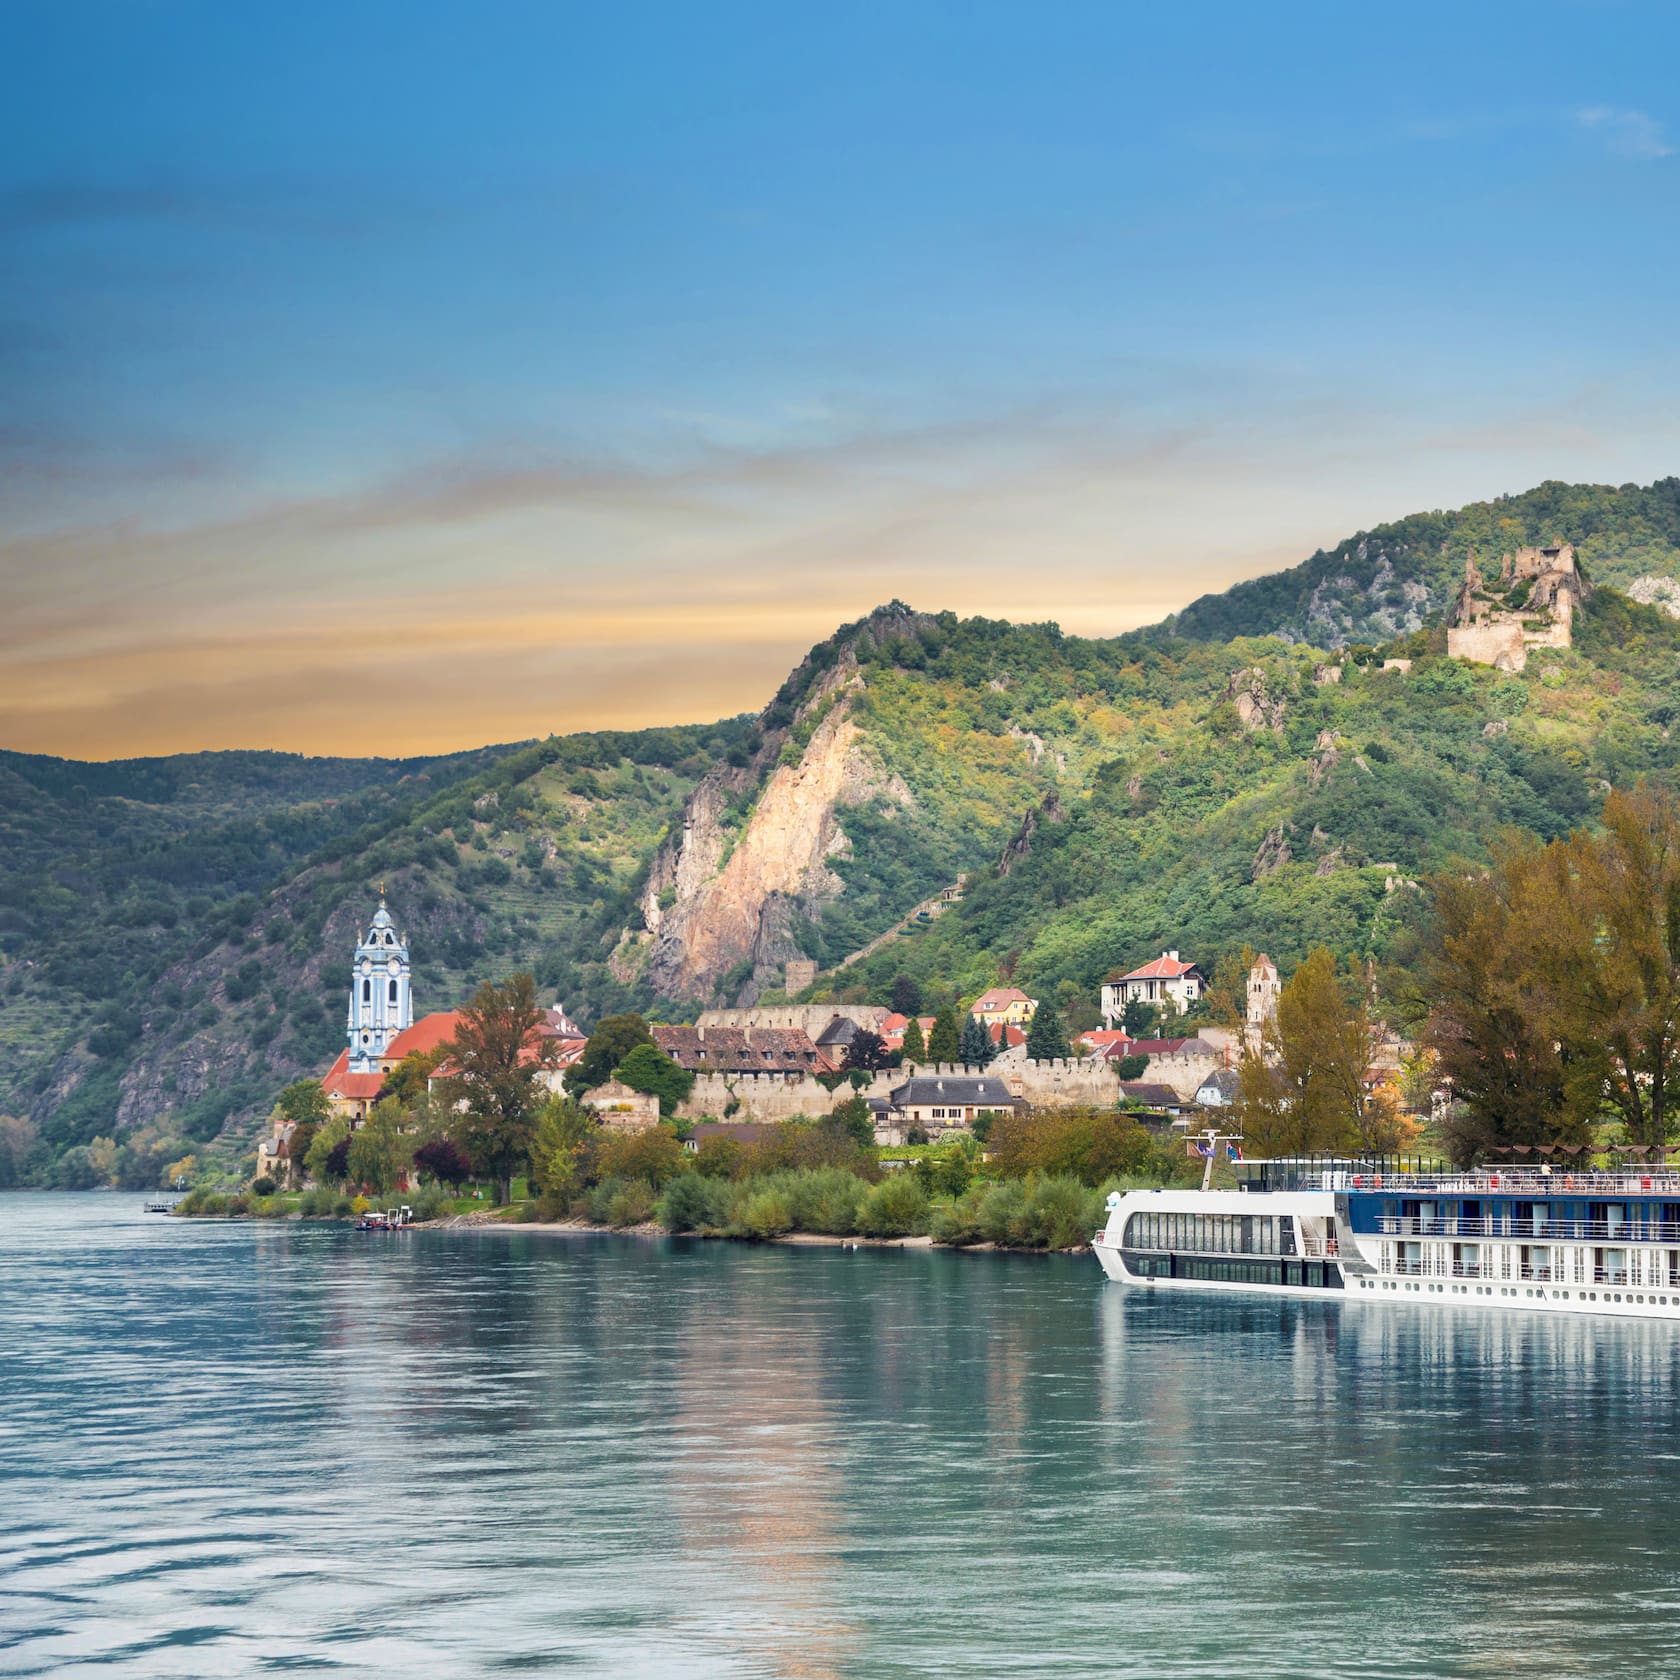 The Danube! Do we love this discontinued style? Sound off in the